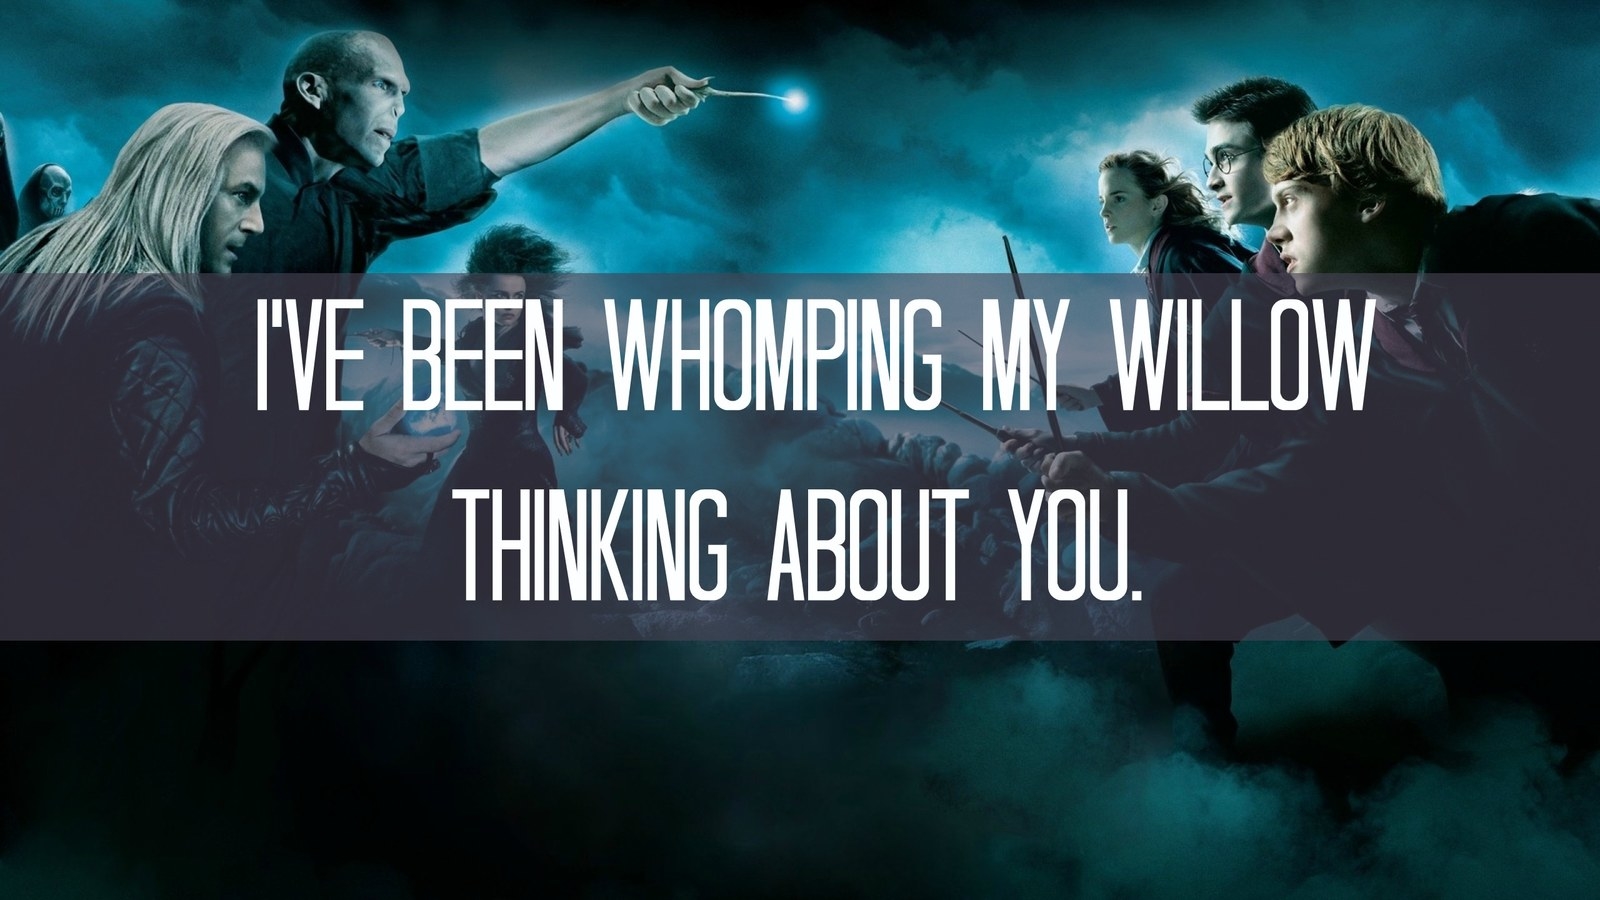 Voldemort and Death Eaters face off against Harry, Ron, and Hermione